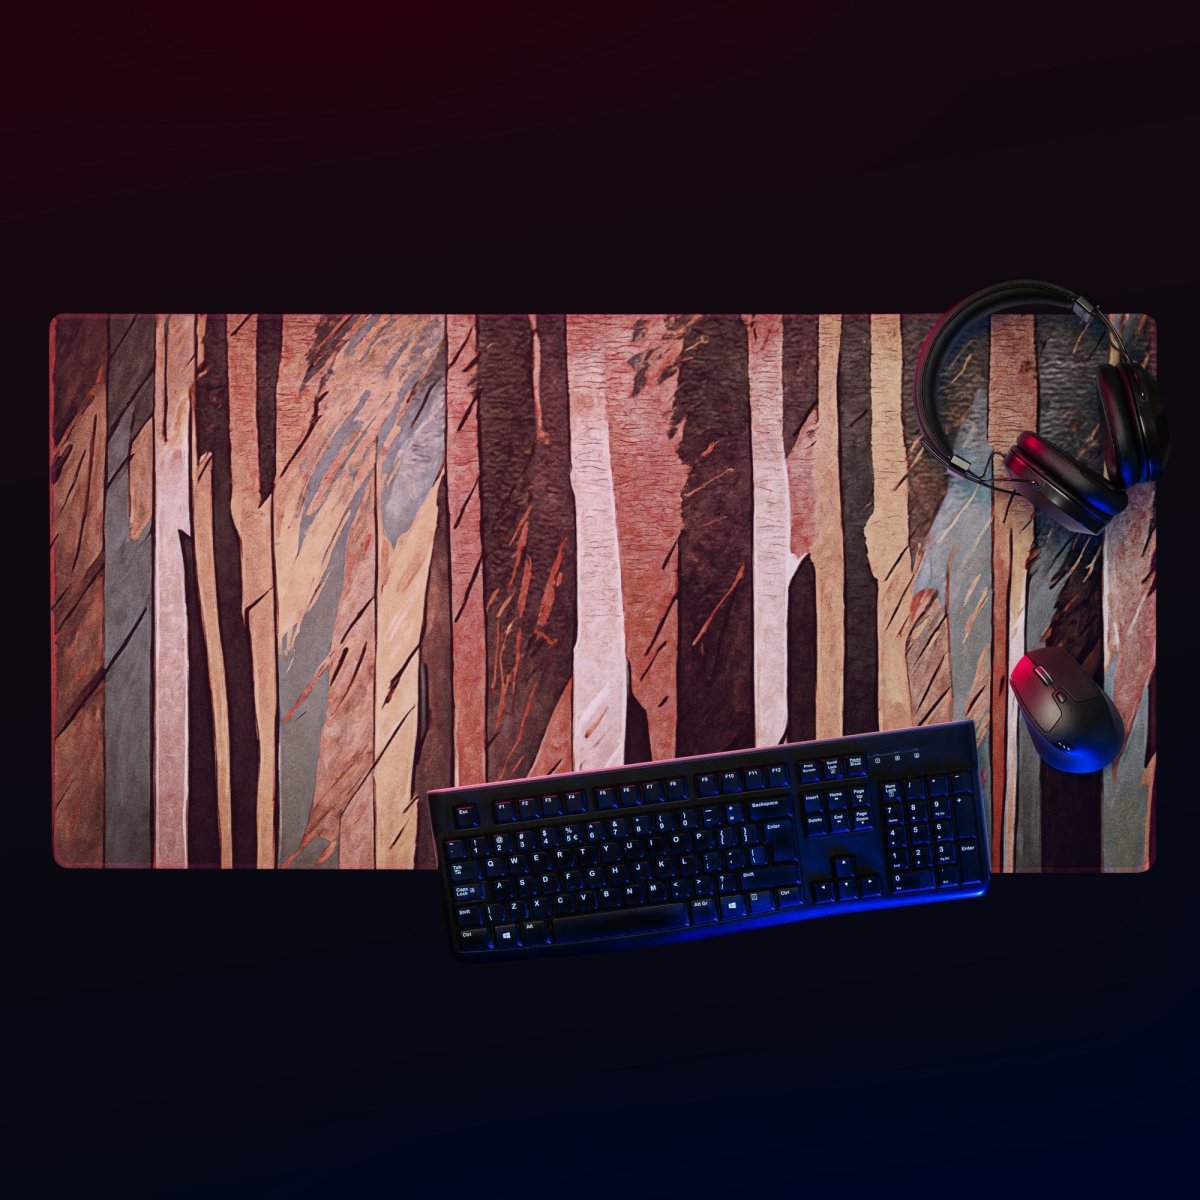 Feral columns - Gaming mouse pad - Ever colorful